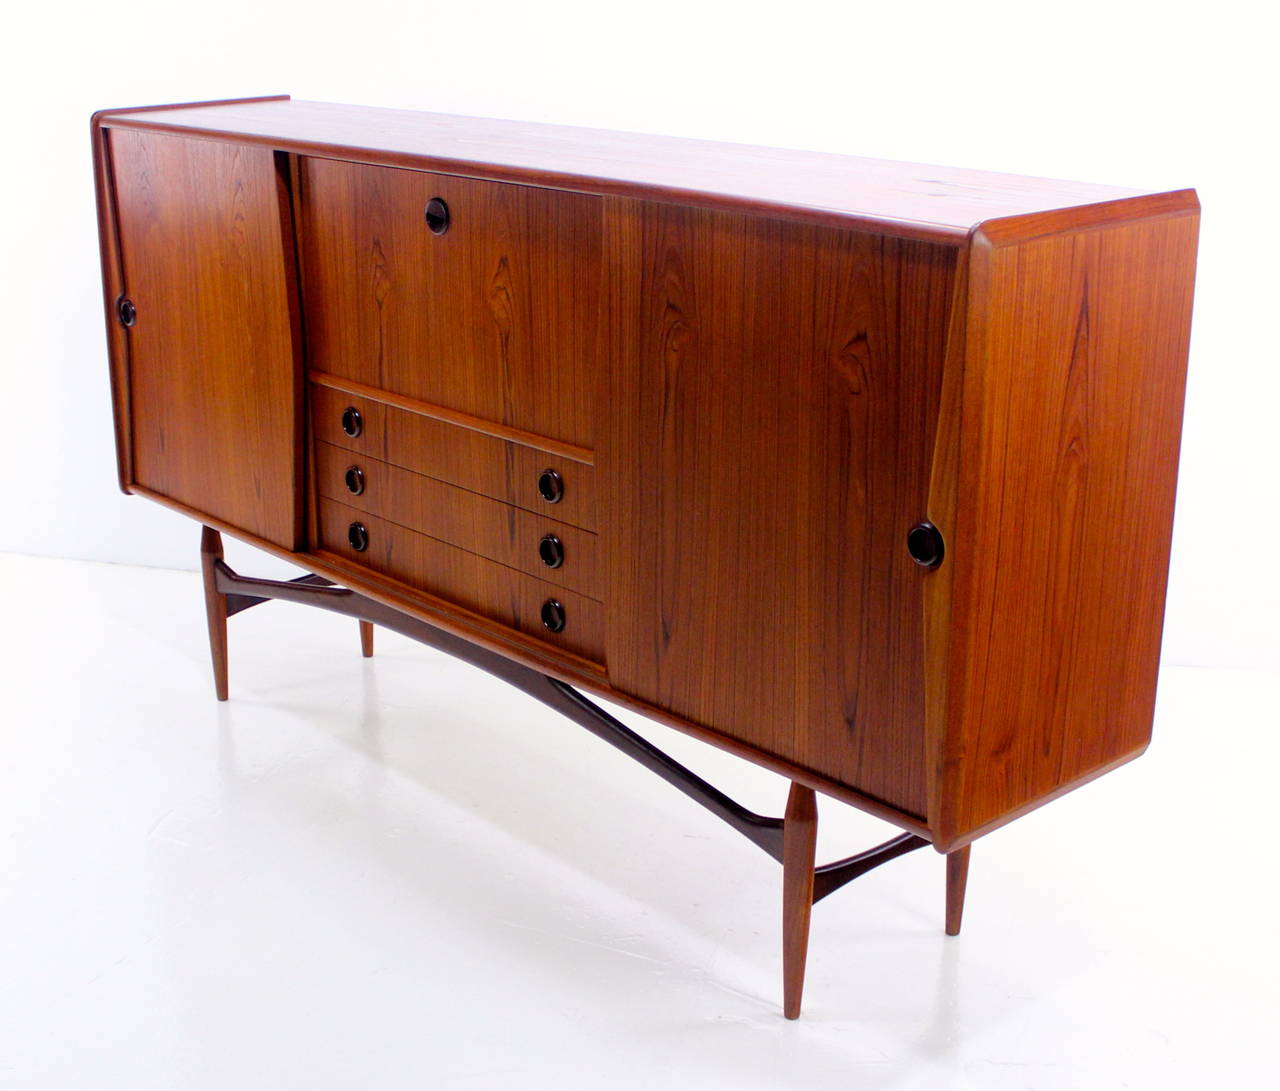 Danish modern credenza with impressive style and size.
Richly grained teak with hardwood edging.
Beautifully crafted base supports extraordinary cabinet.
Sliding doors on each end open to adjustable shelves.
Drop down door opens to lighted